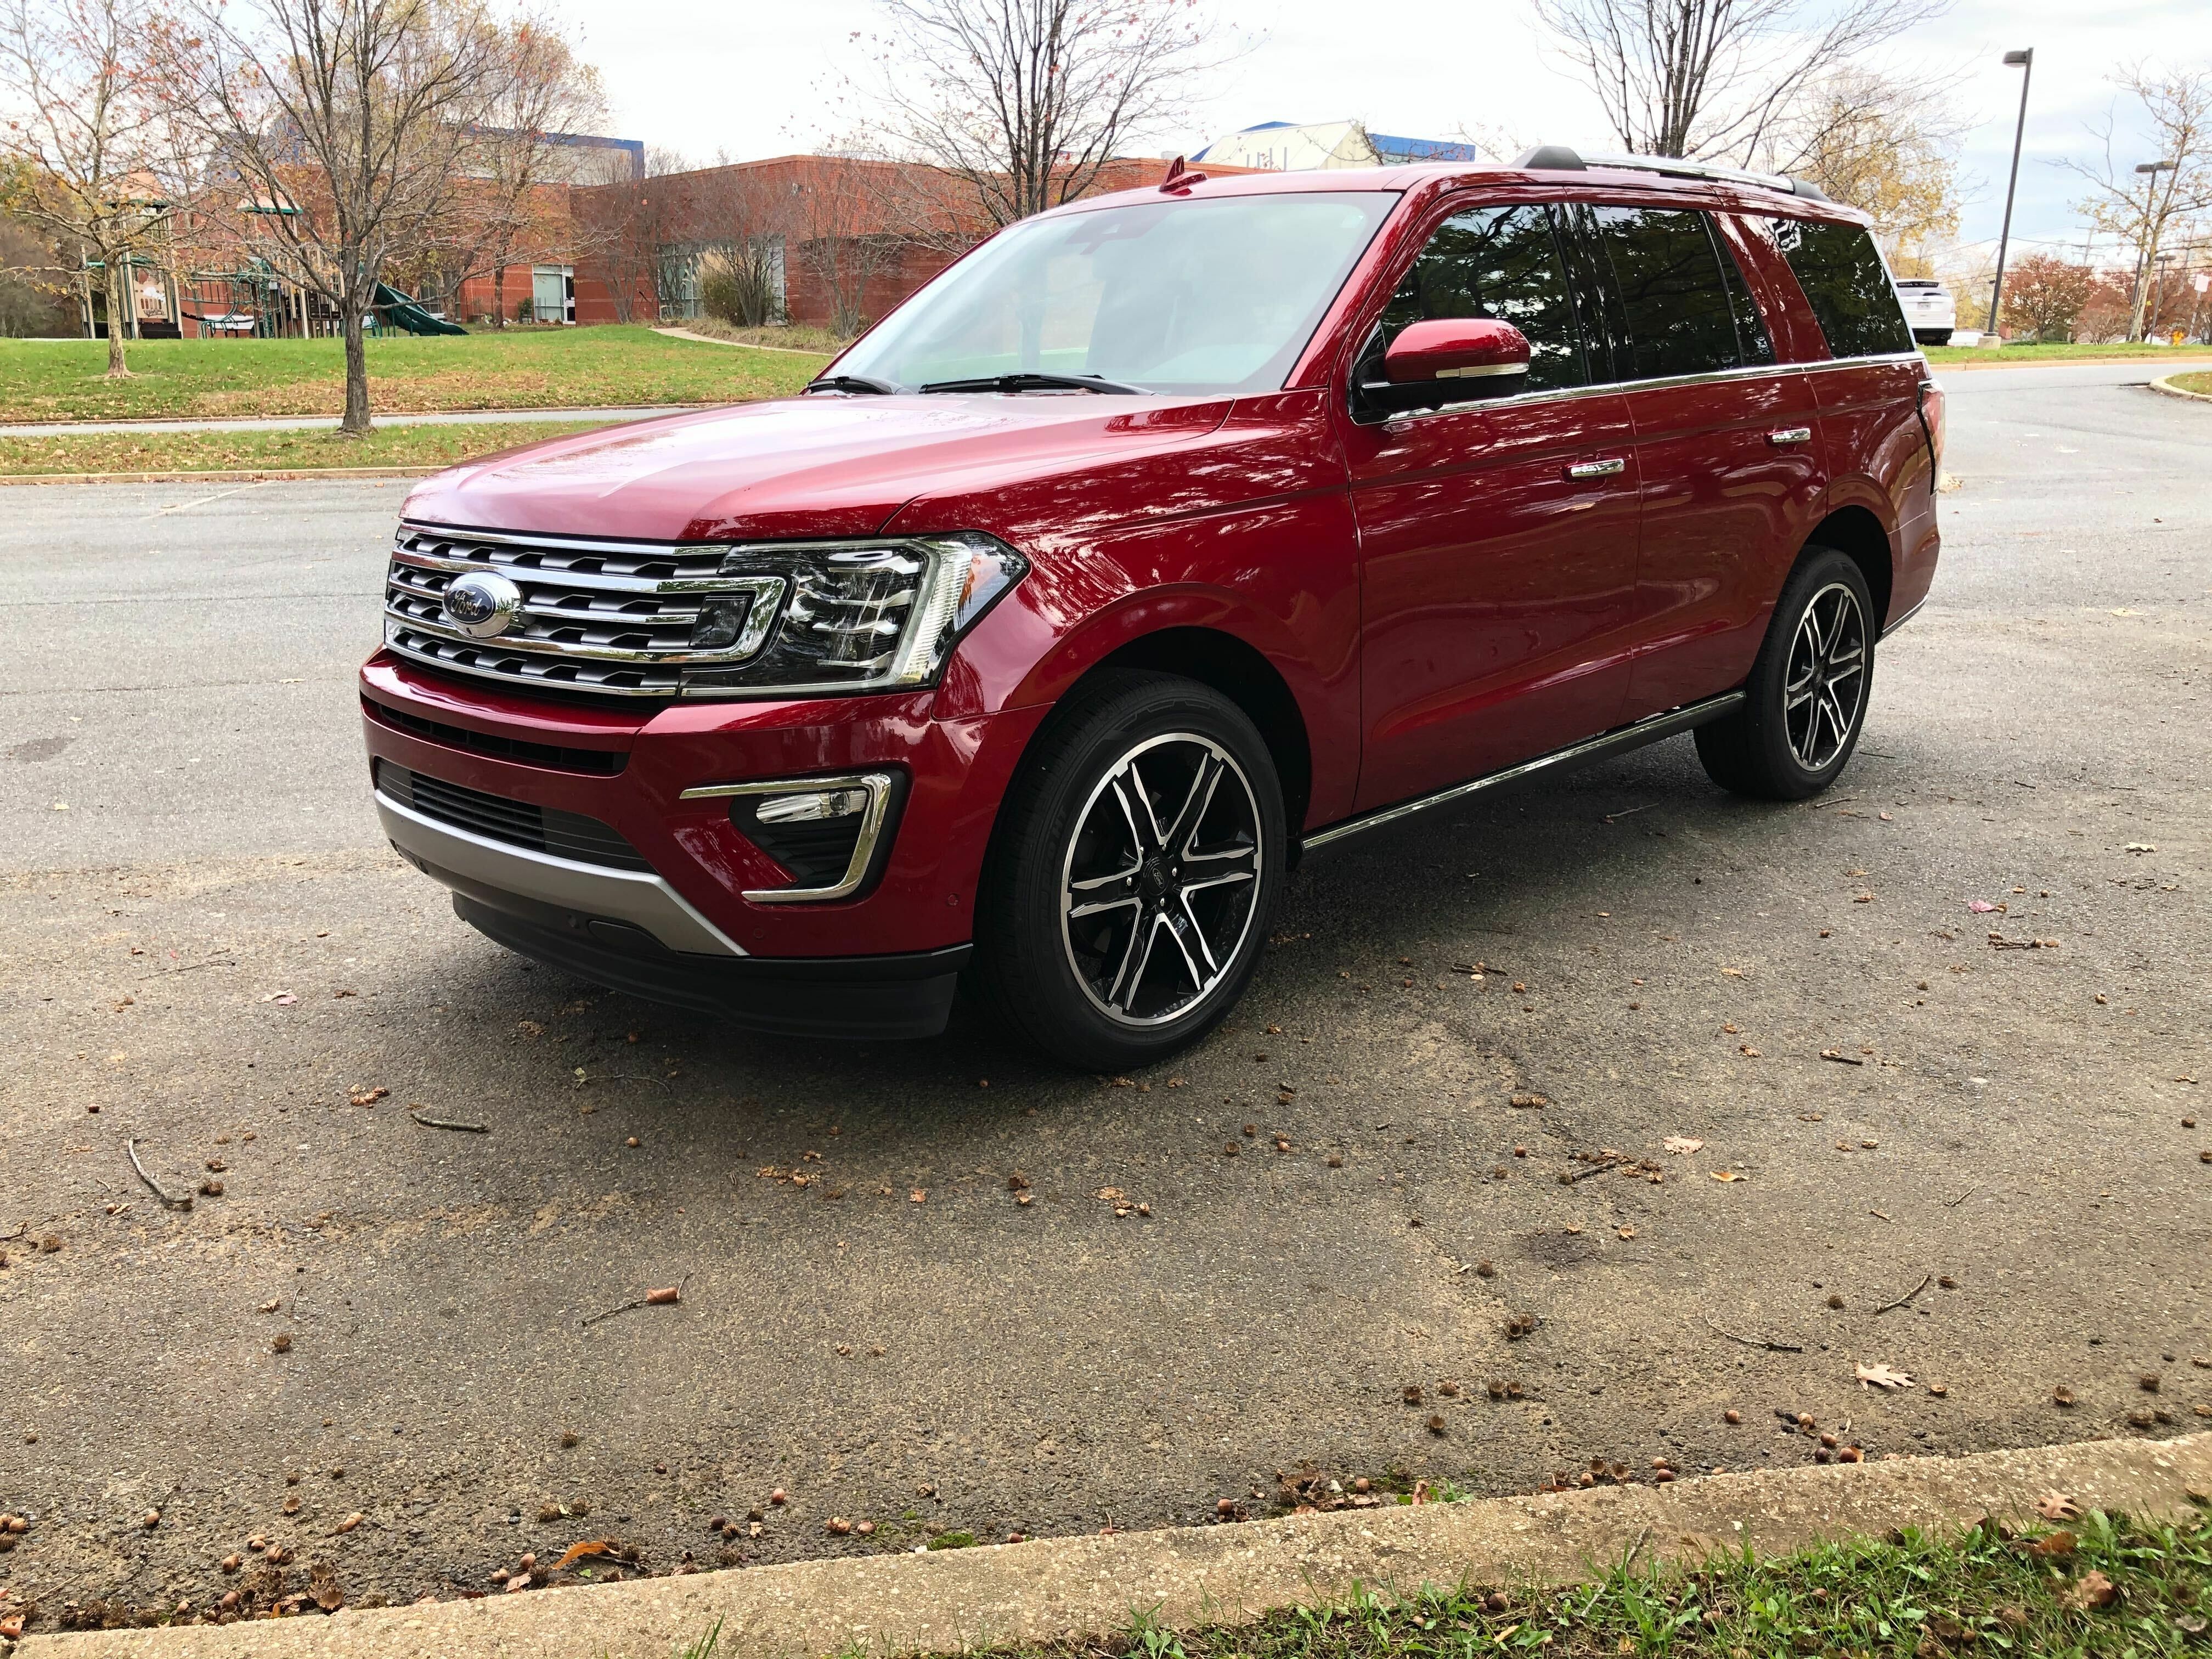 Car Review: 2020 Ford Expedition has space, if you’ve got dough - WTOP News